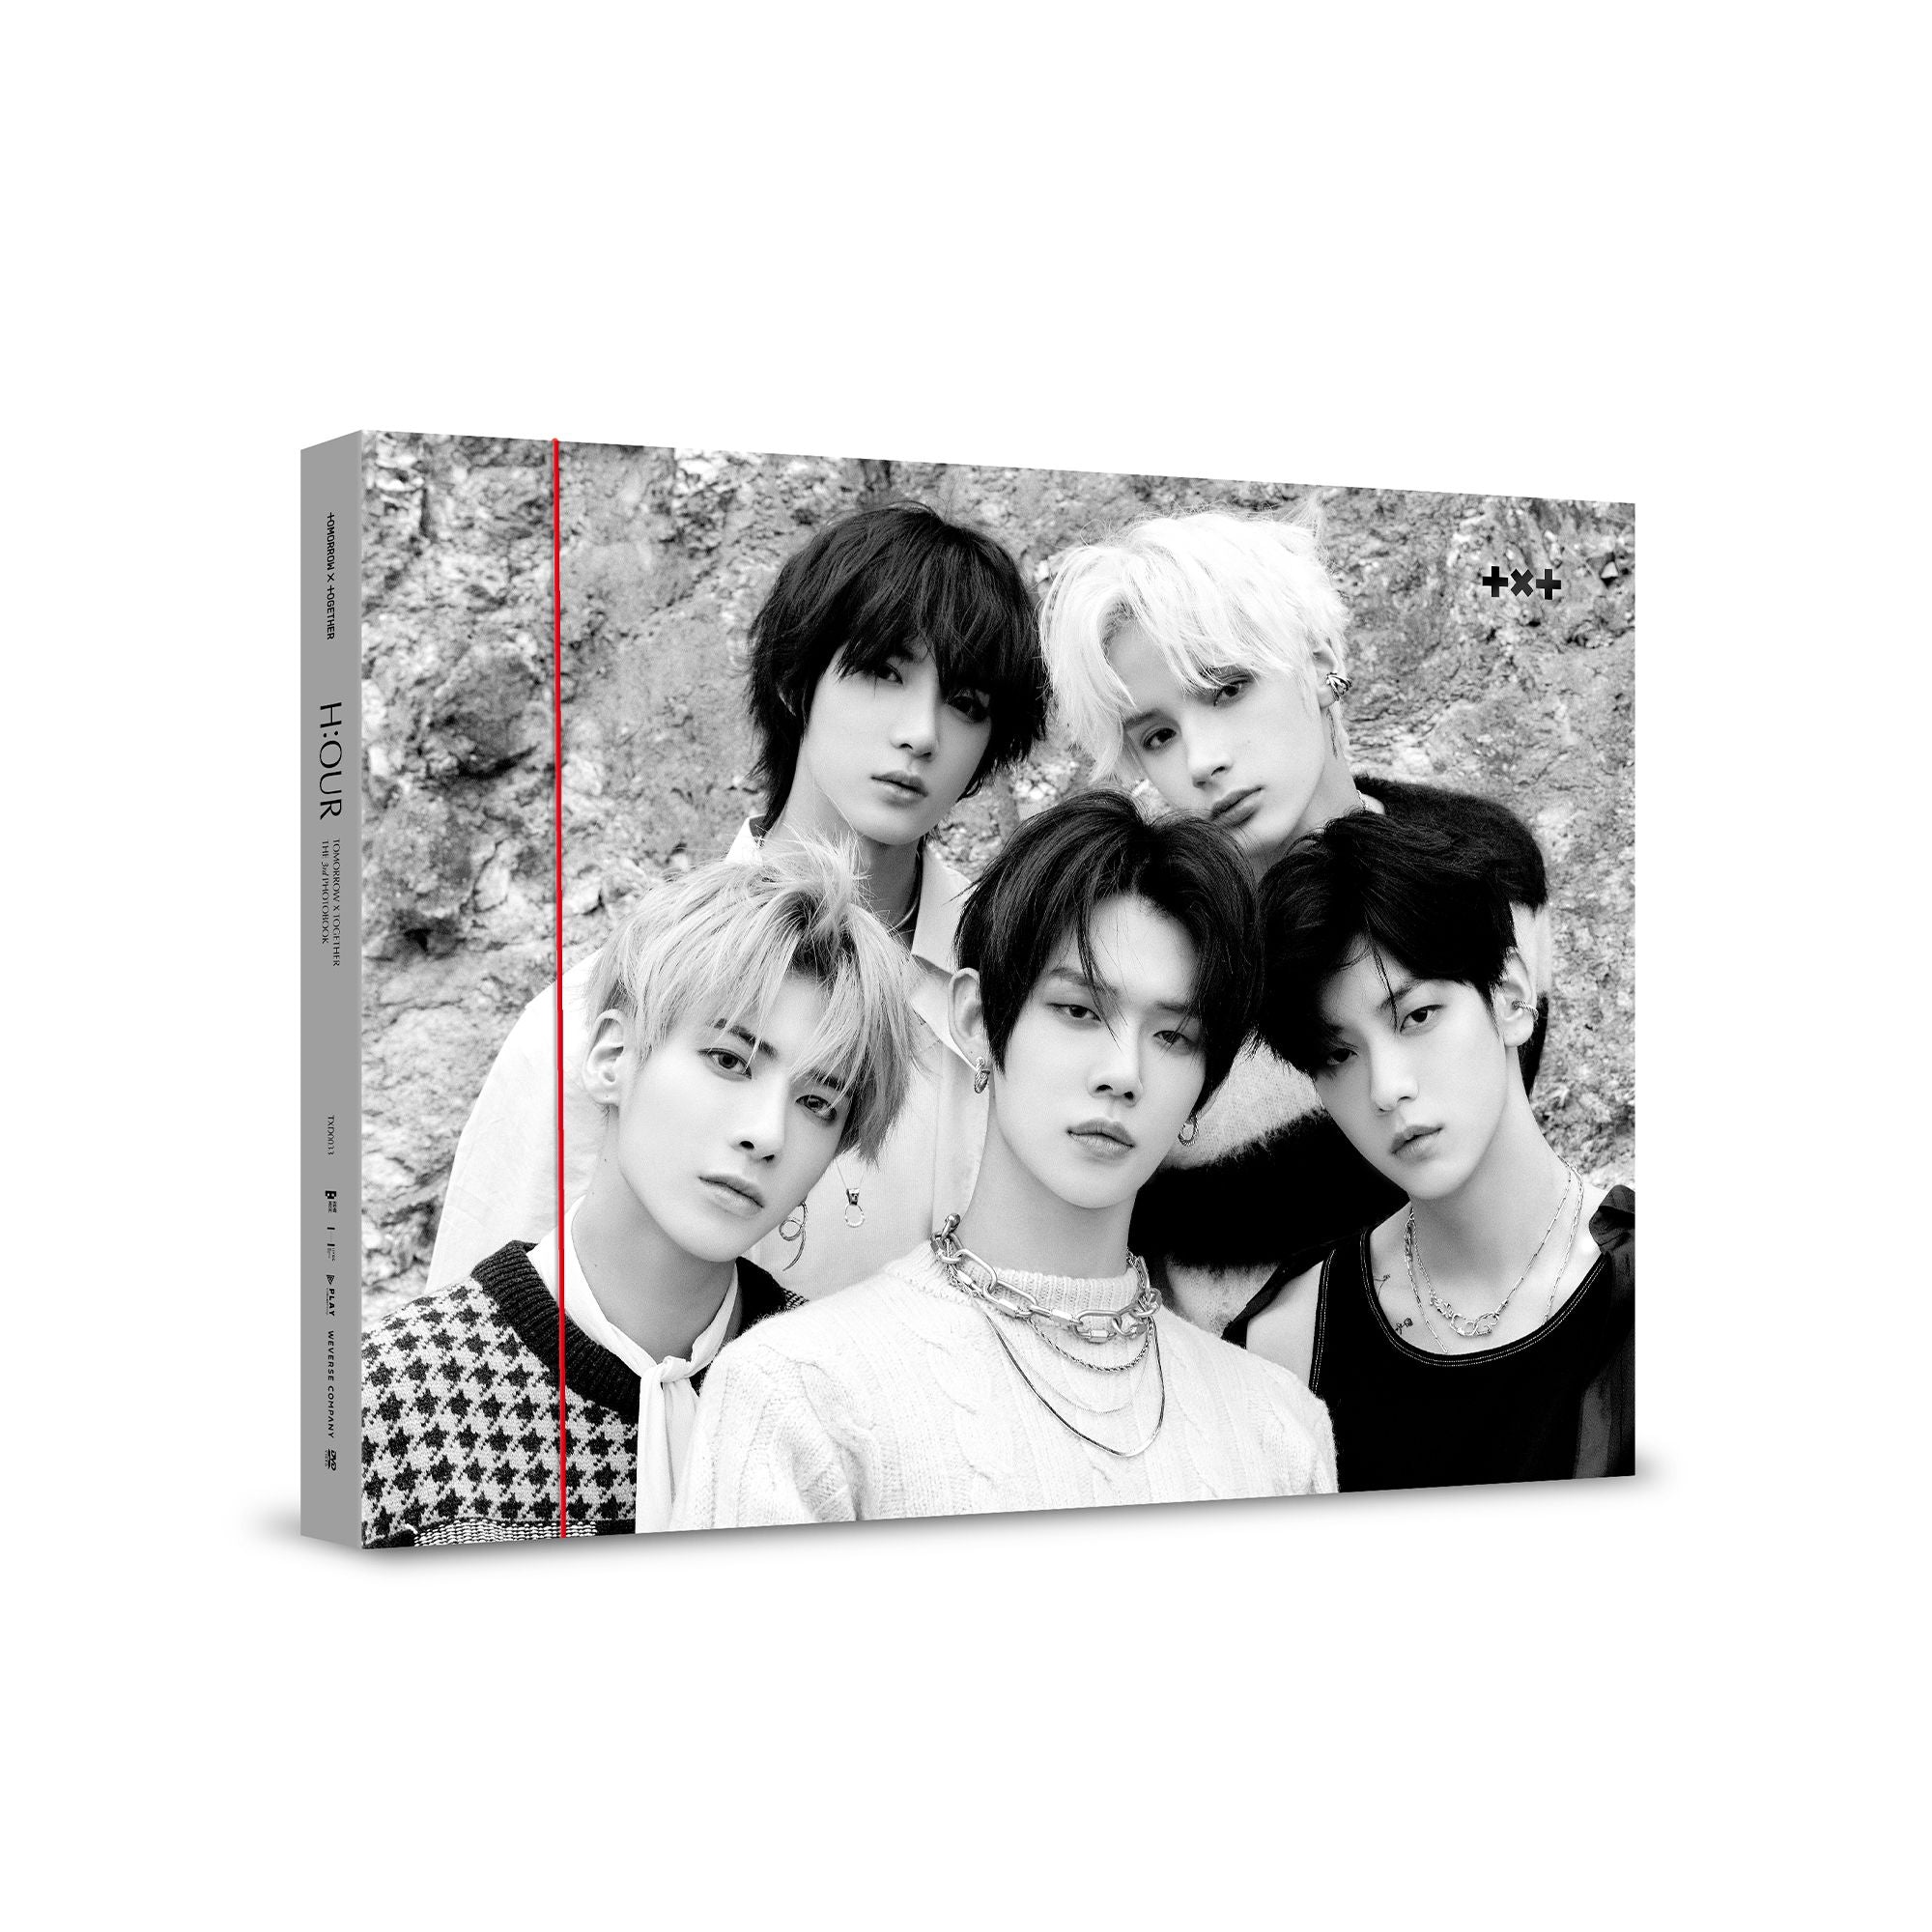 TXT - THE 3RD PHOTOBOOK H:OUR in Suncheon - KSHOPINA